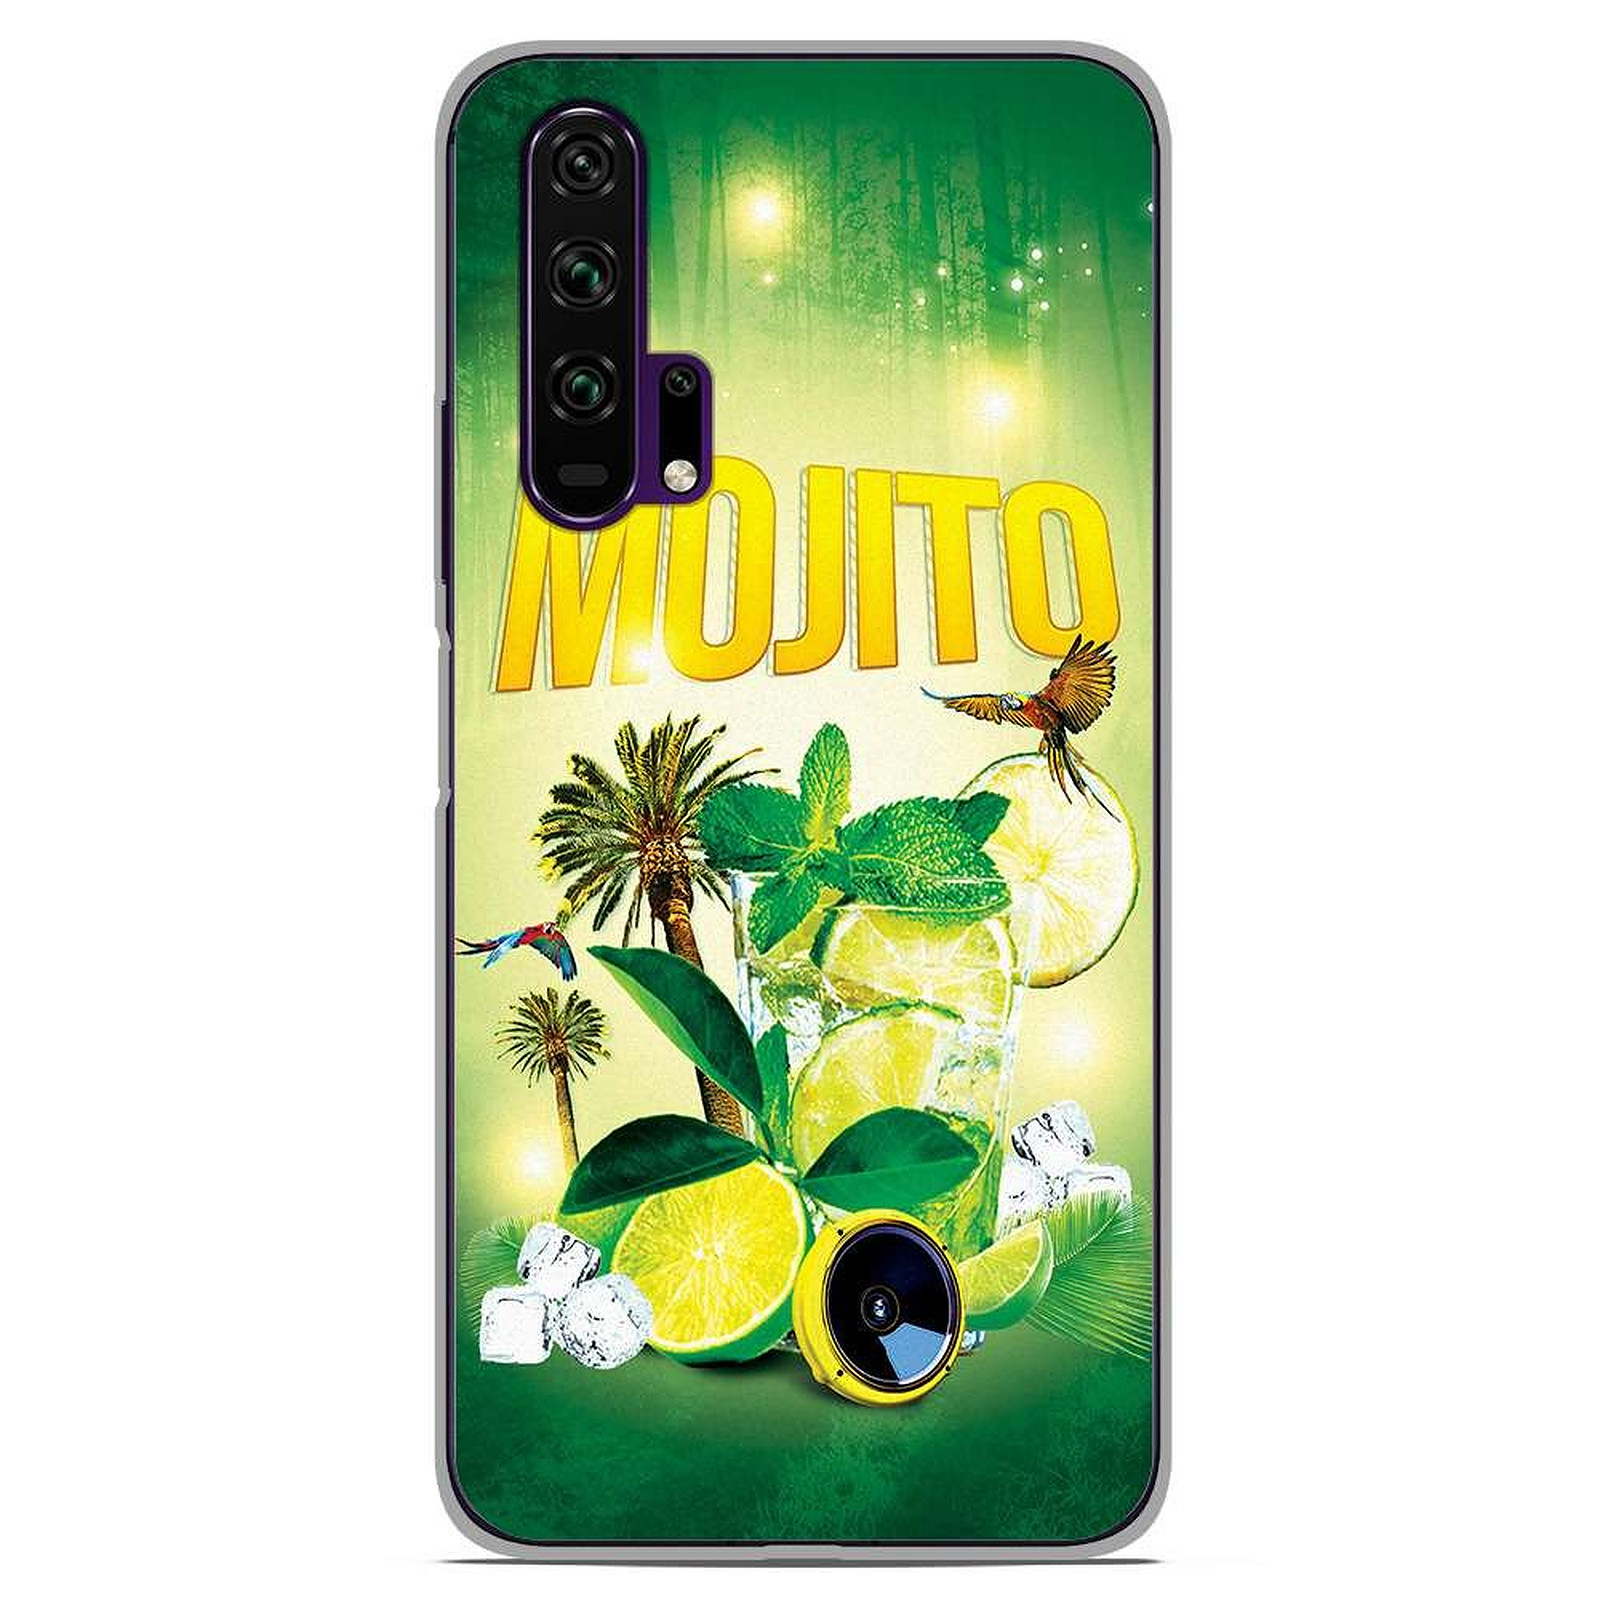 1001 Coques Coque silicone gel Huawei Honor 20 Pro motif Mojito Foret - Coque telephone 1001Coques